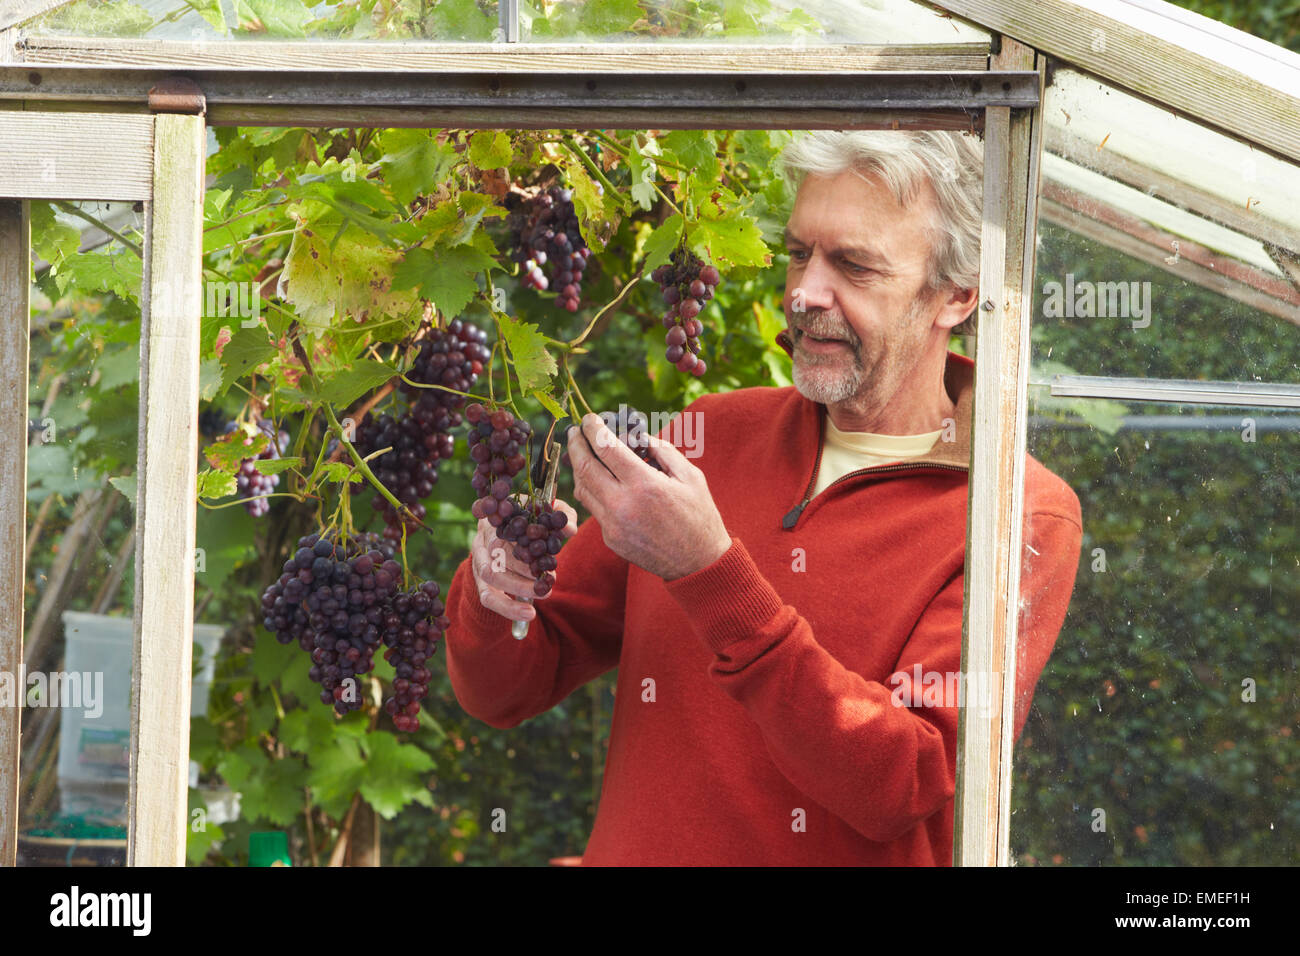 Mature Man Cultivating Grapes In Greenhouse Stock Photo